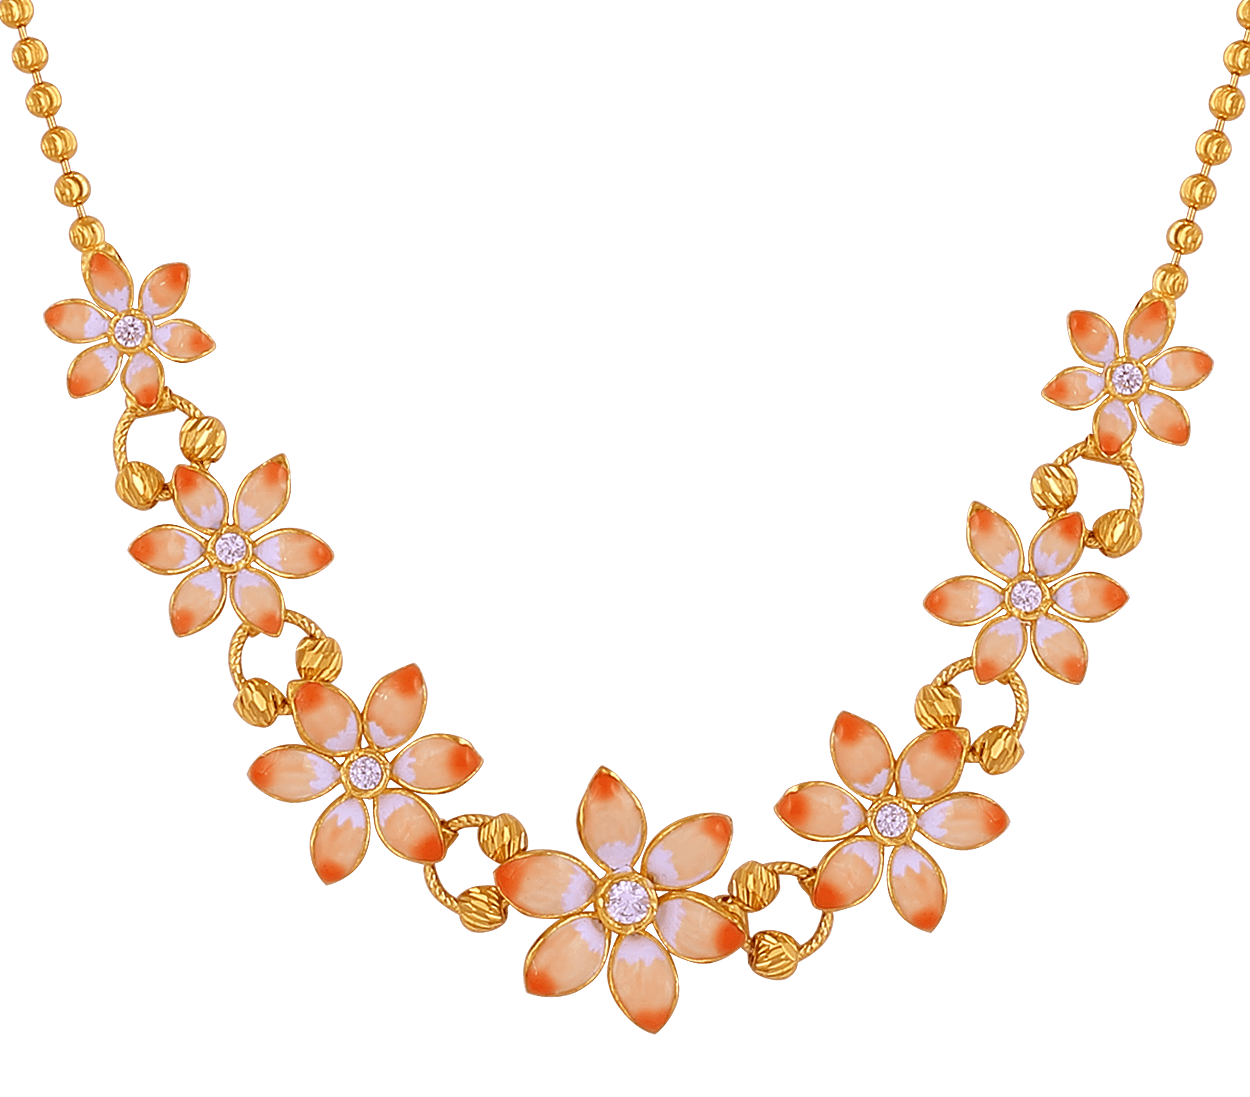 https://ariajewellers.in/storage//product/Flower chain-1590710093-10_04_2023_10_53_am.png?format=webp